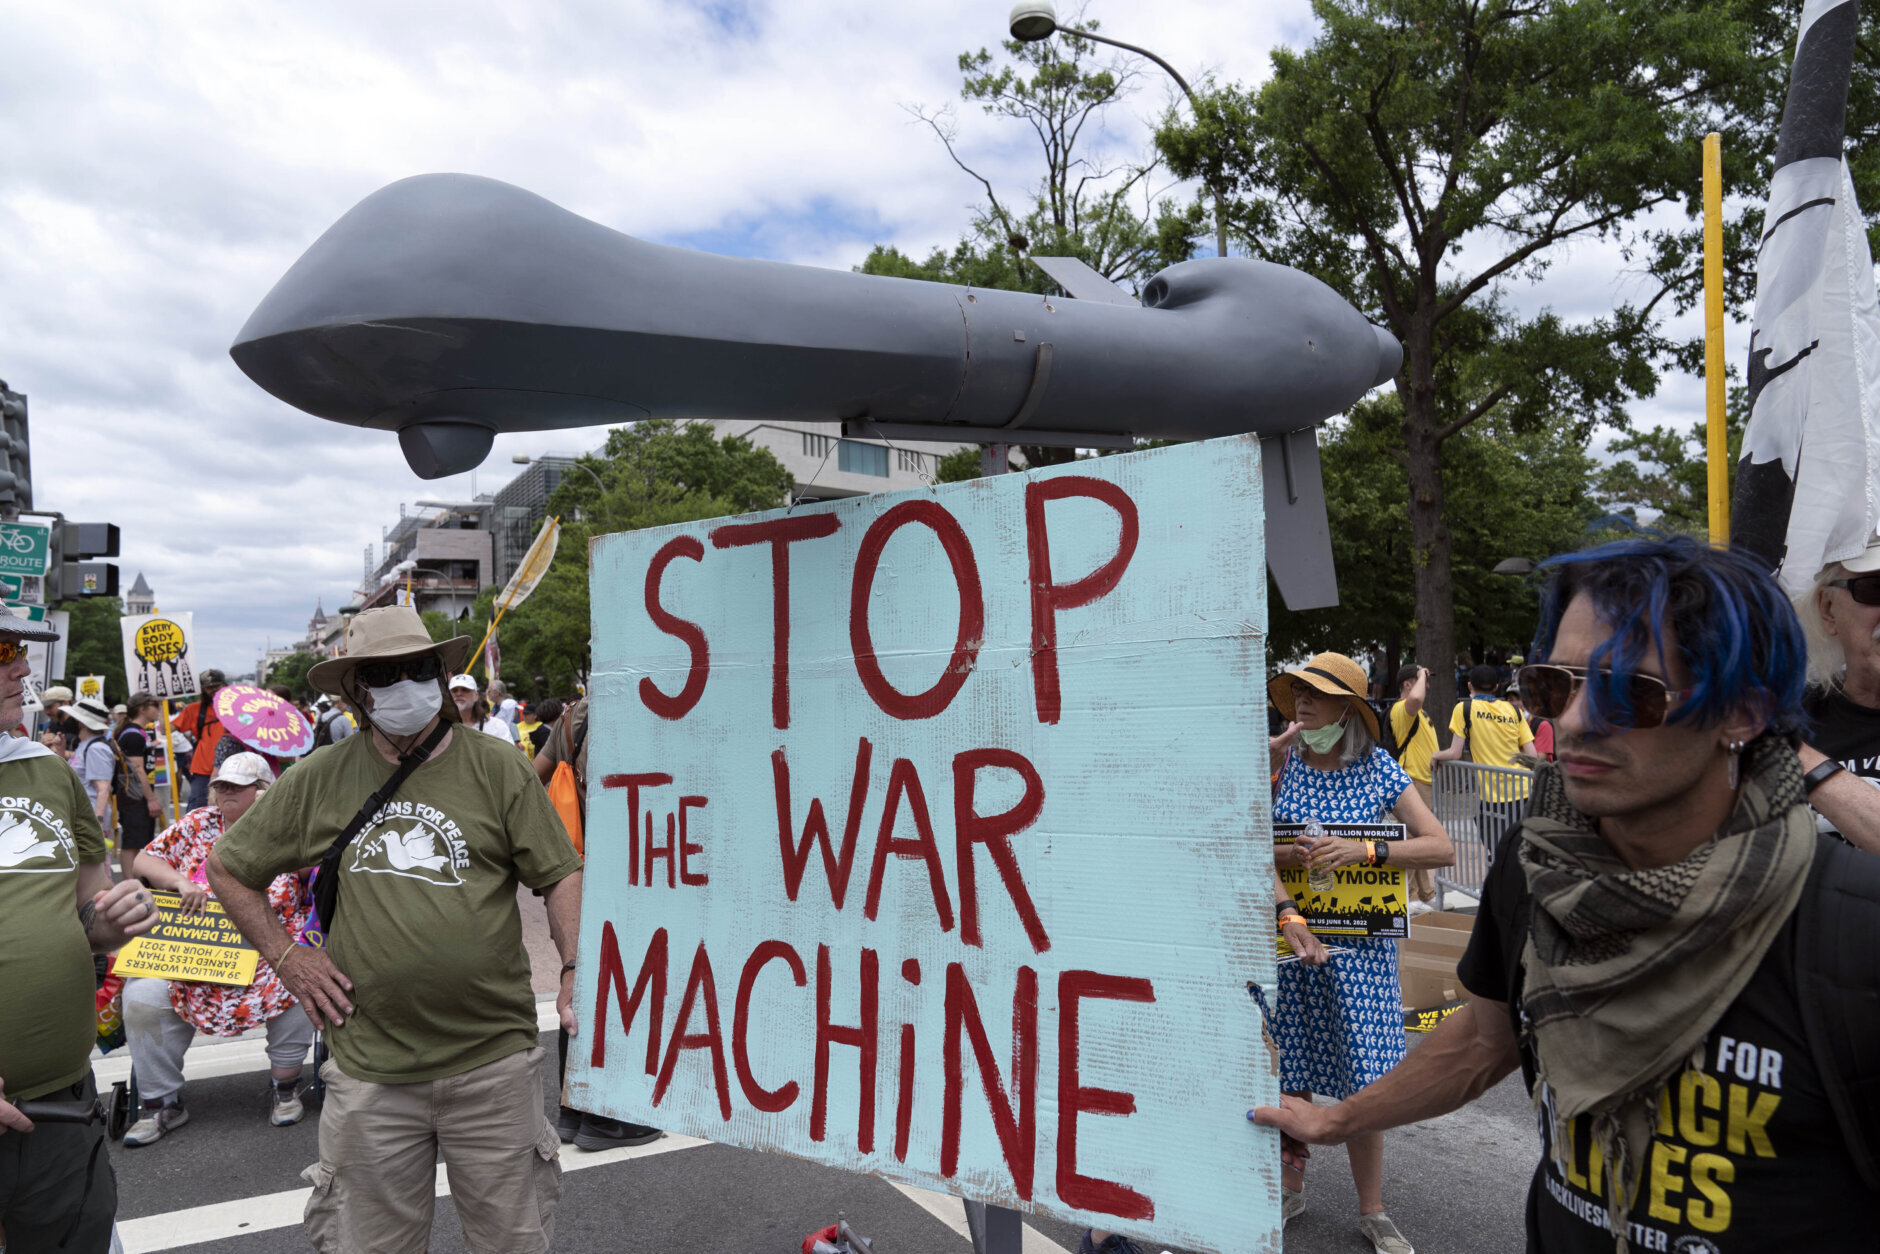 Anti-war demonstrators hold a mock drone as they rally during the Poor People's Campaign, "Moral March" on Pennsylvania Avenue in Washington, Saturday, June 18, 2022. (AP Photo/Jose Luis Magana)